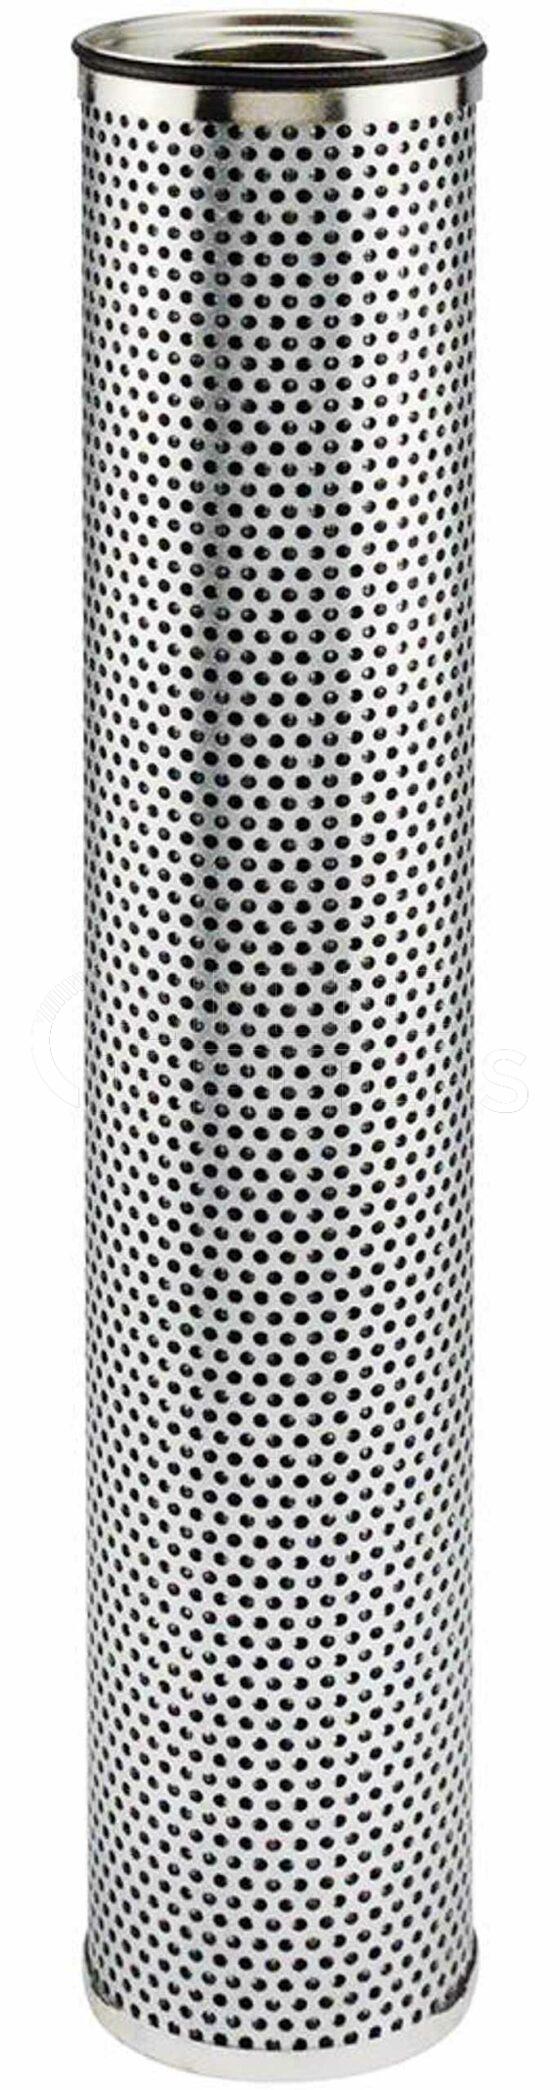 Baldwin PT23522-MPG. Baldwin – Hydraulic Filter Elements – PT23522-MPG OBSOLETE OBSOLETE. Availability Limited to Dealer Stock. Compatible Competitor Part Number Sennebogen 3751027324; Donaldson P560403 Outside Diameter 3 3/16 (81.0) Inside Diameter 1 5/8 (41.3) One End Application Sennebogen Applications Length 16 13/16 (427/0) Product Type Maximum Performance Glass Hydraulic Element Brand Baldwin Division Engine Mobile Aftermarket Industry […]